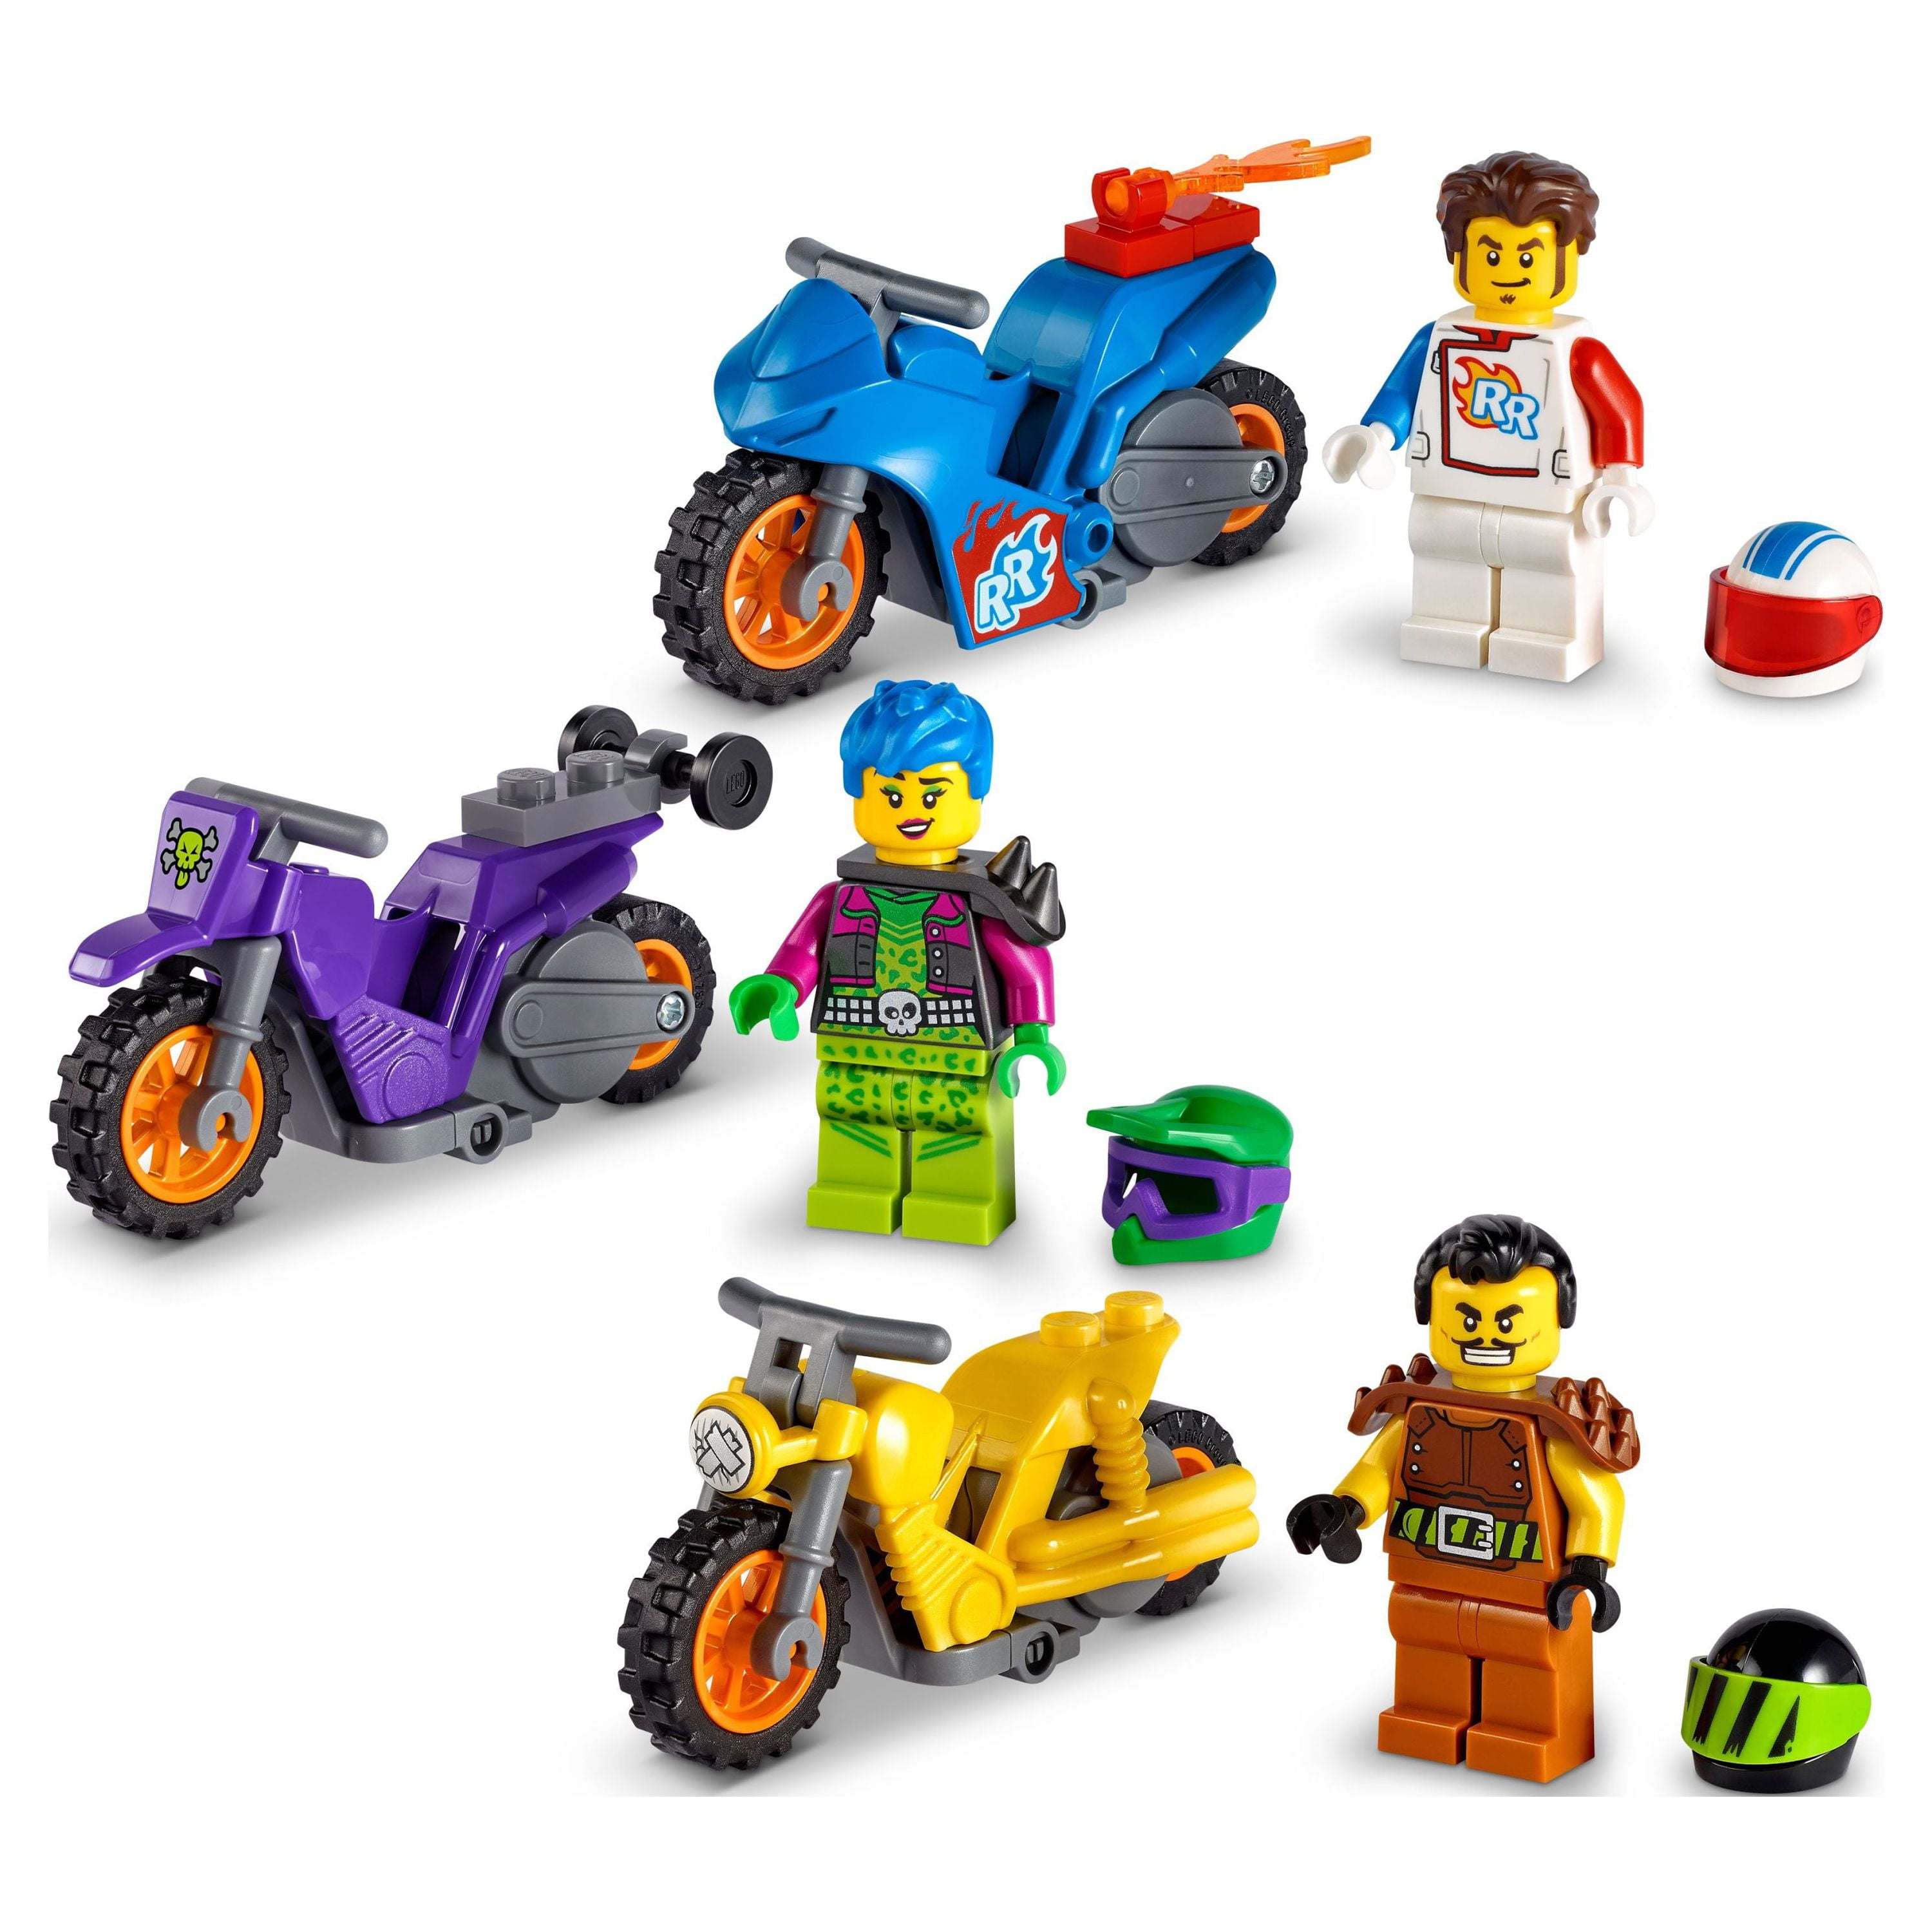 Four new LEGO CITY Stuntz sets have been delayed online